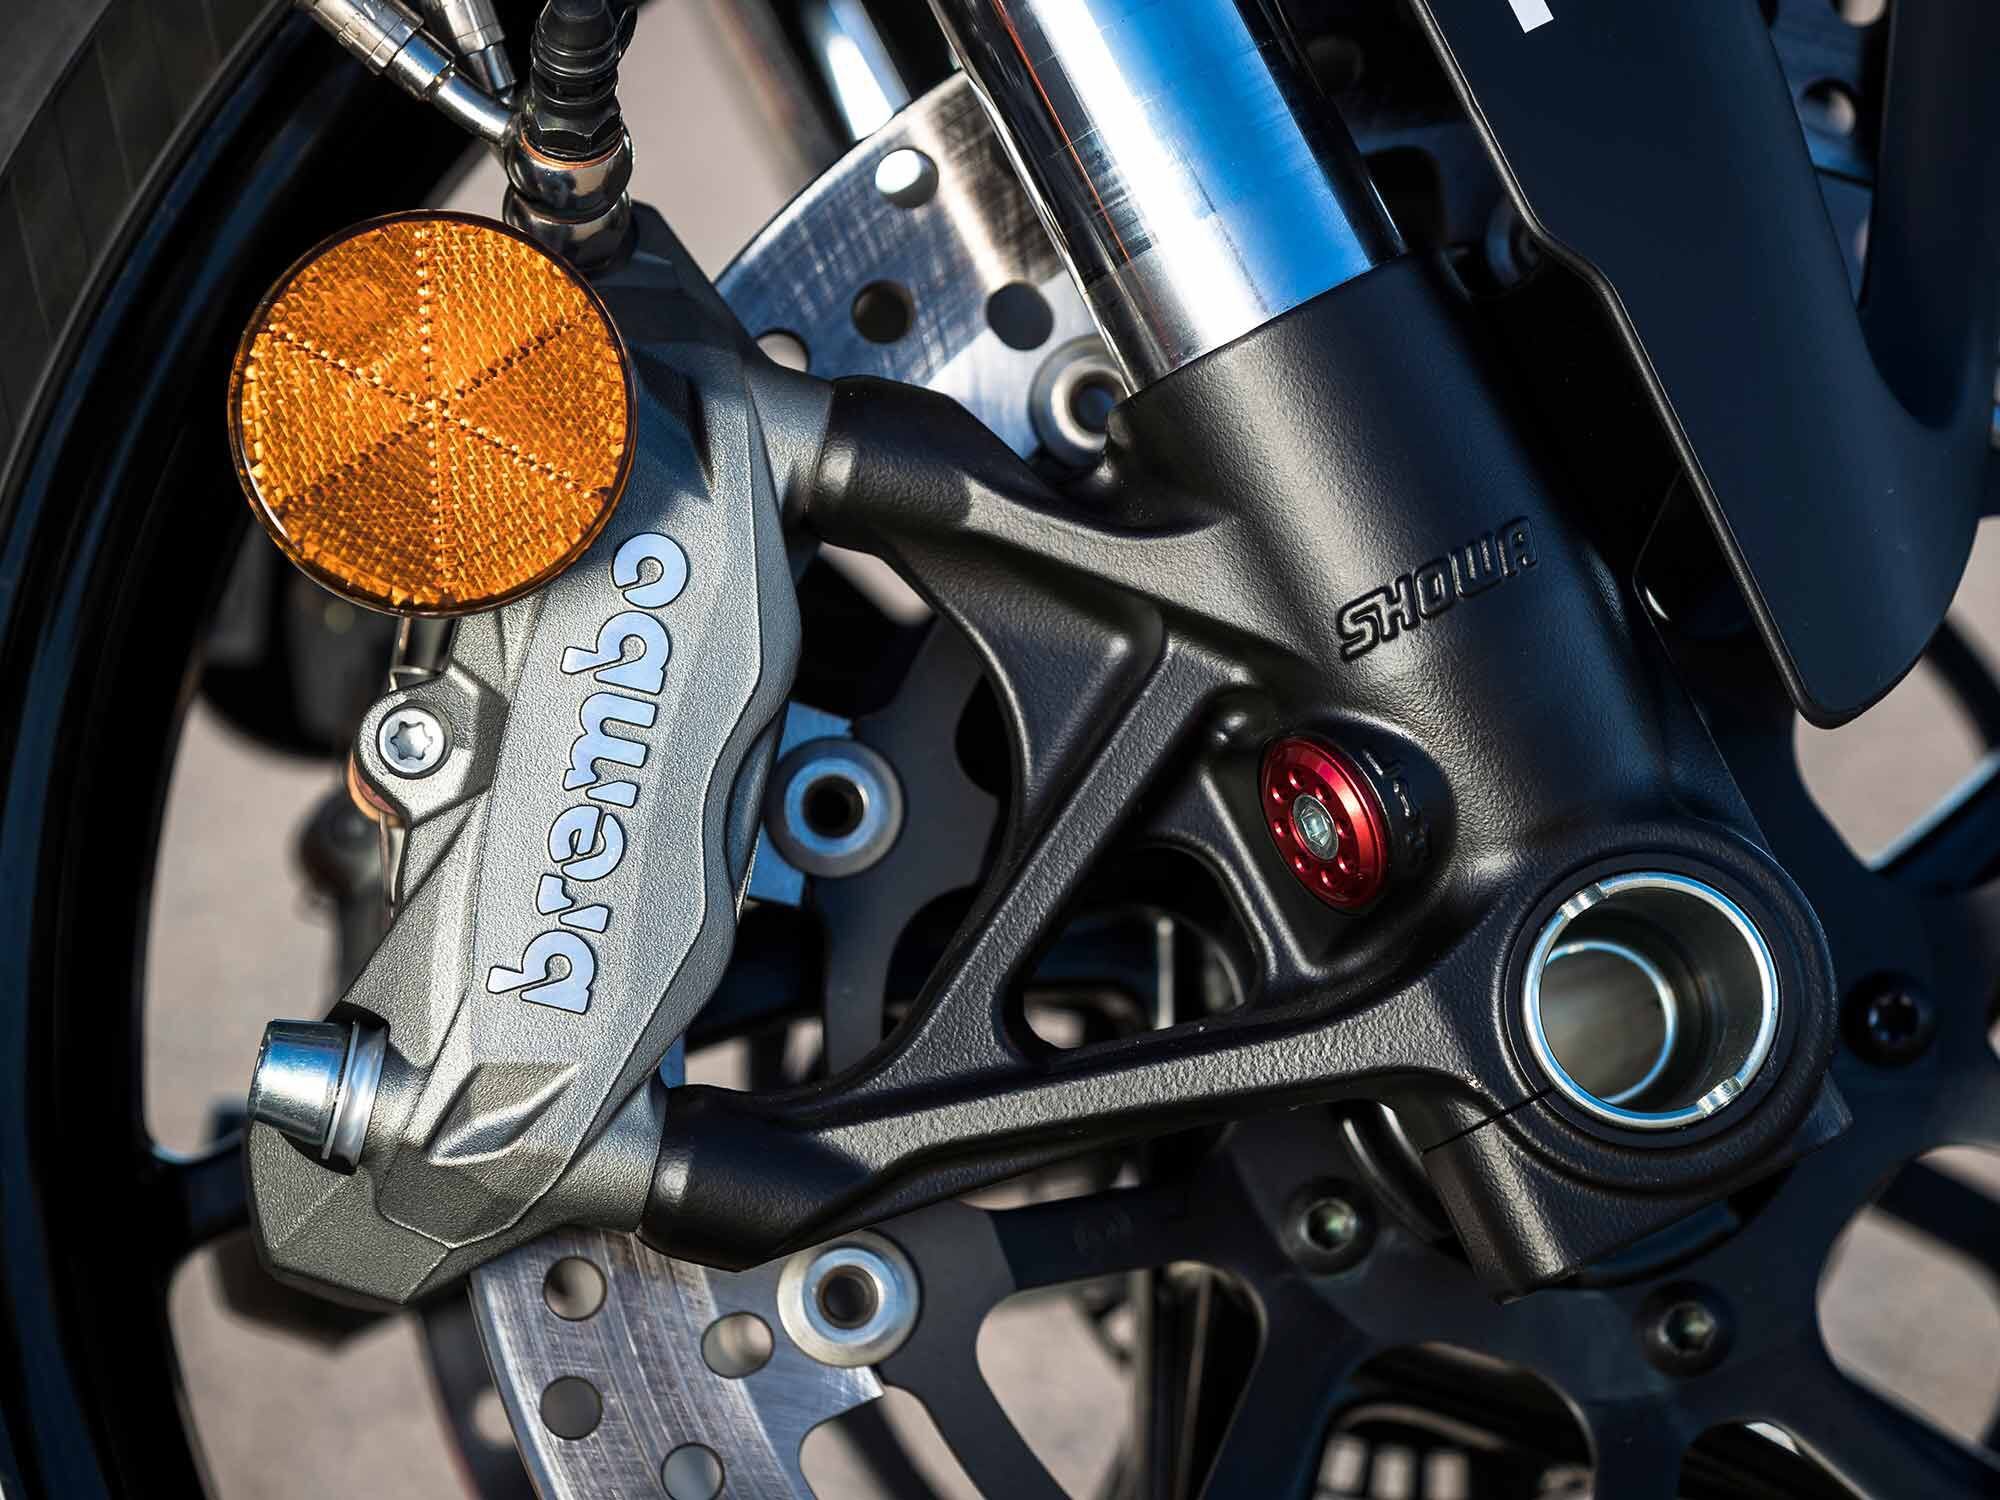 The Streetfighter V2 is stopped via the same Brembo M4.32 Monoblock brake calipers as the Panigale, but utilizes a less aggressive pad compound that hinders feel at the brake lever. Still, the brakes work well, and Ducati’s ABS Cornering EVO system is top-notch.